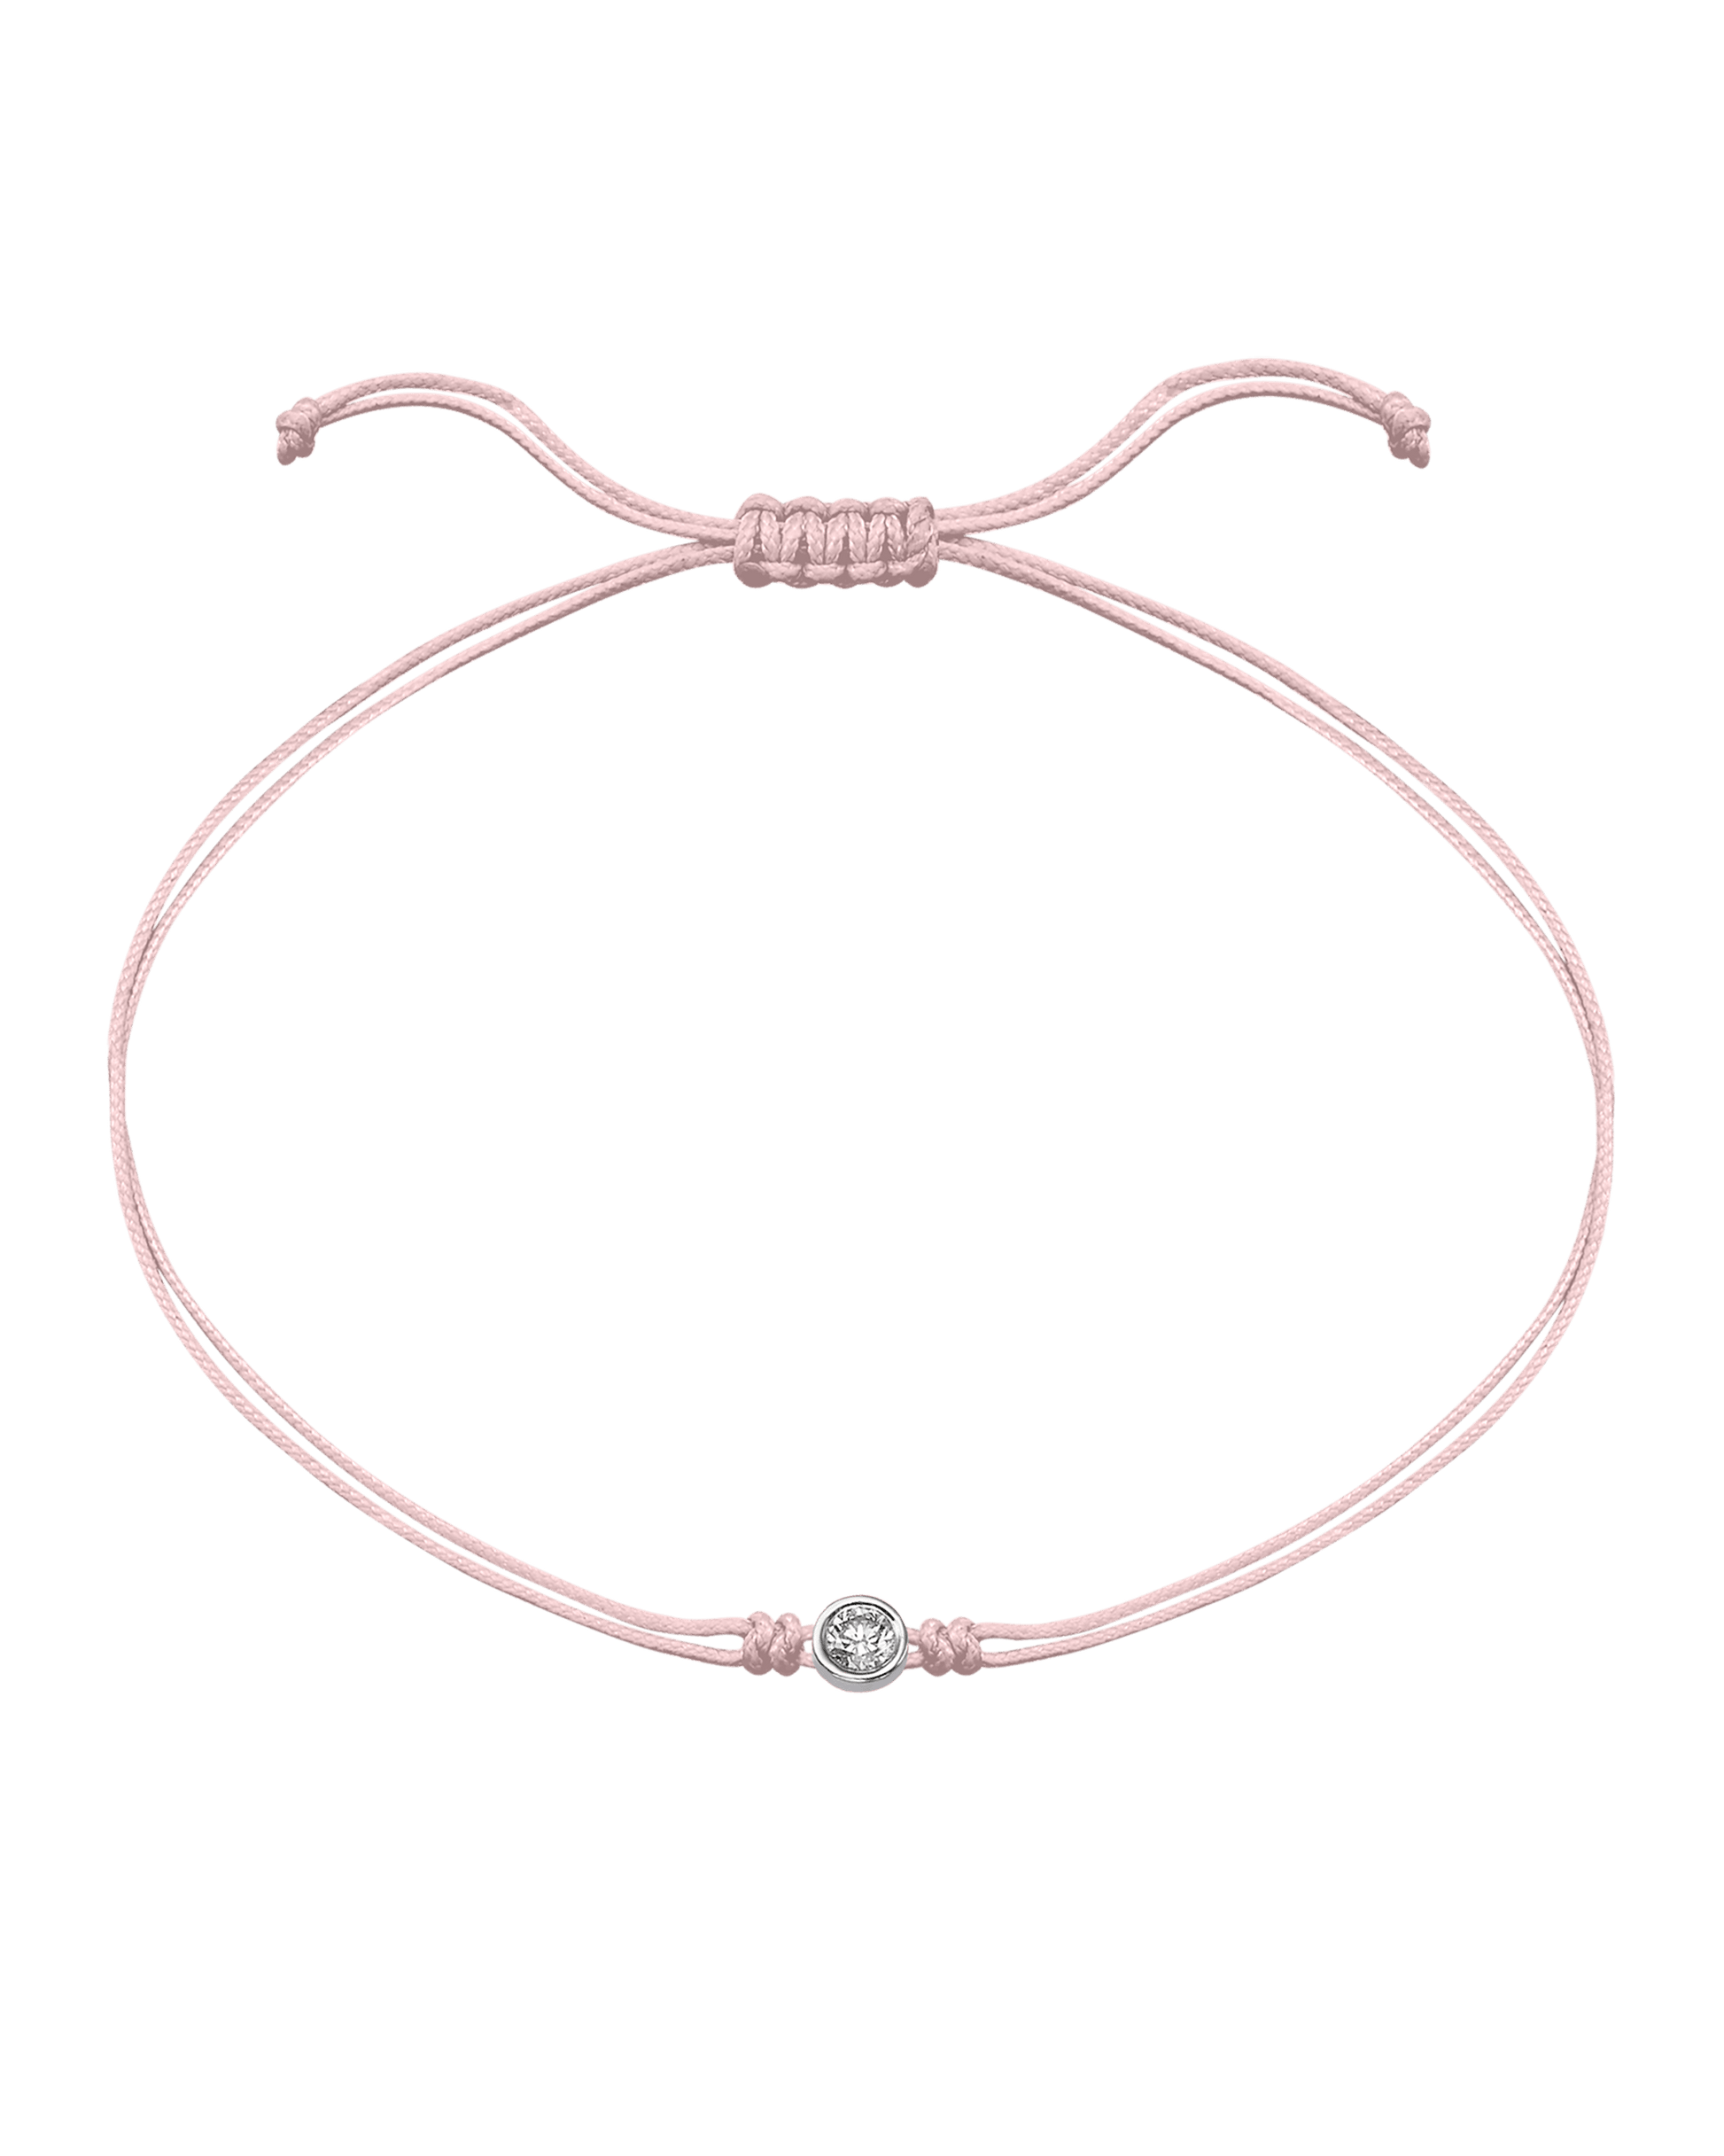 Summer Edition : The Classic String of Love - 14K White Gold Bracelets magal-dev Strawberry Bellini - Light Pink Large: 0.10ct 